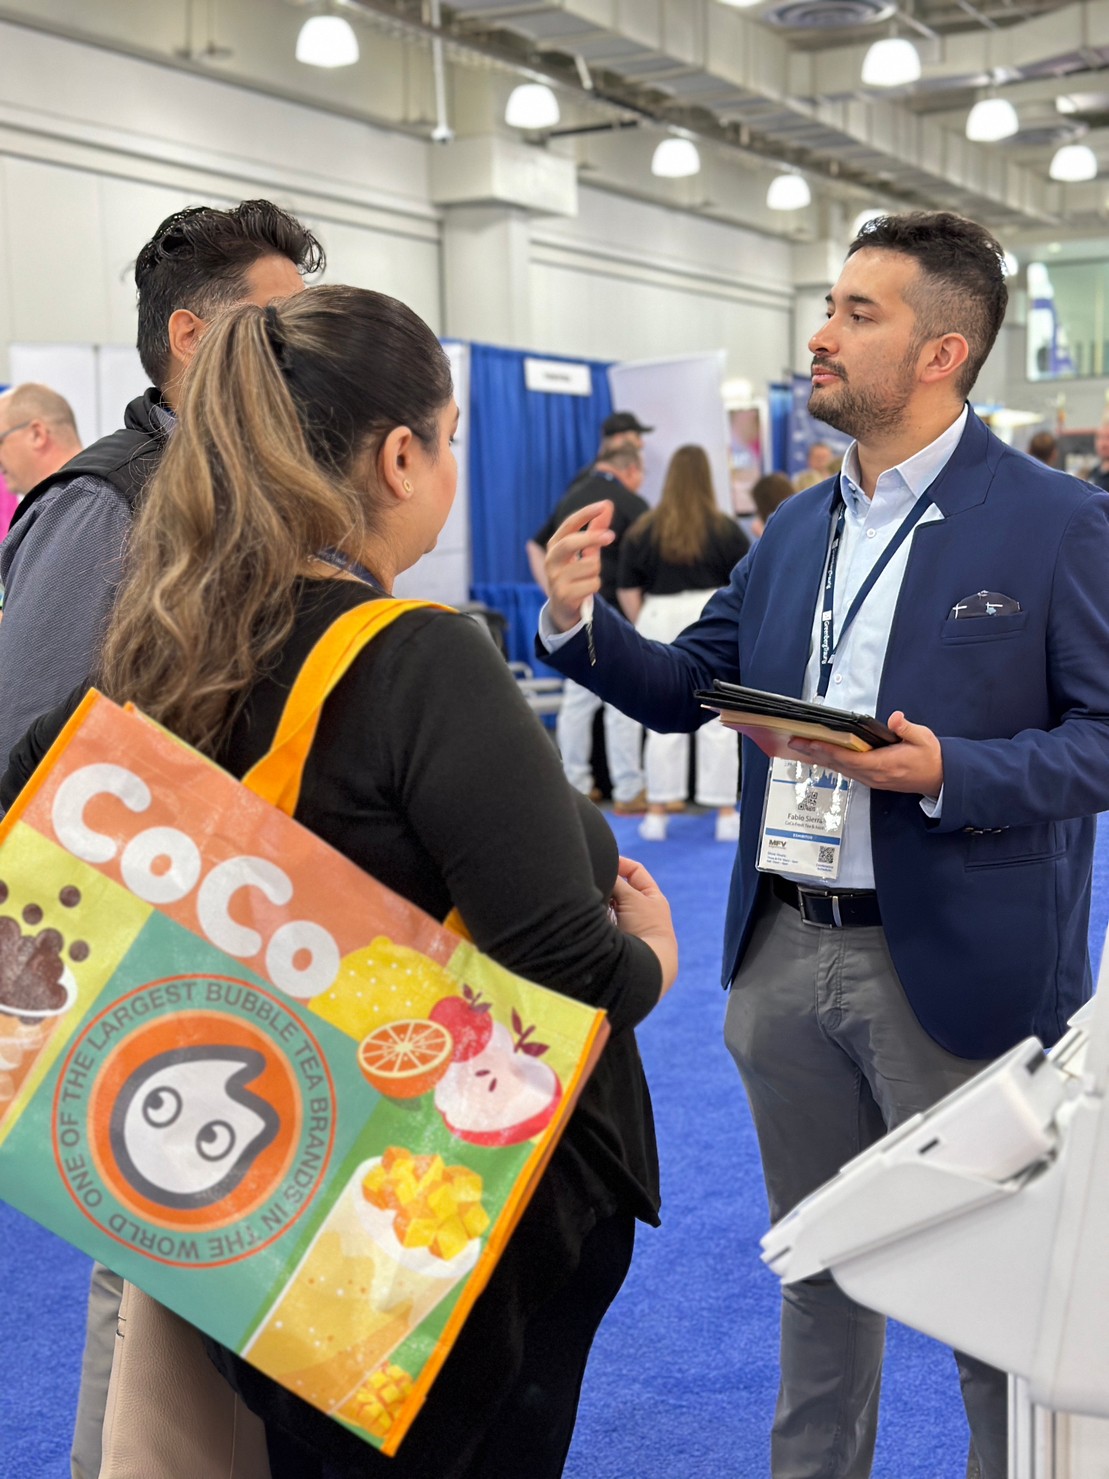 New York Franchise expo - talk with coco franchise expert